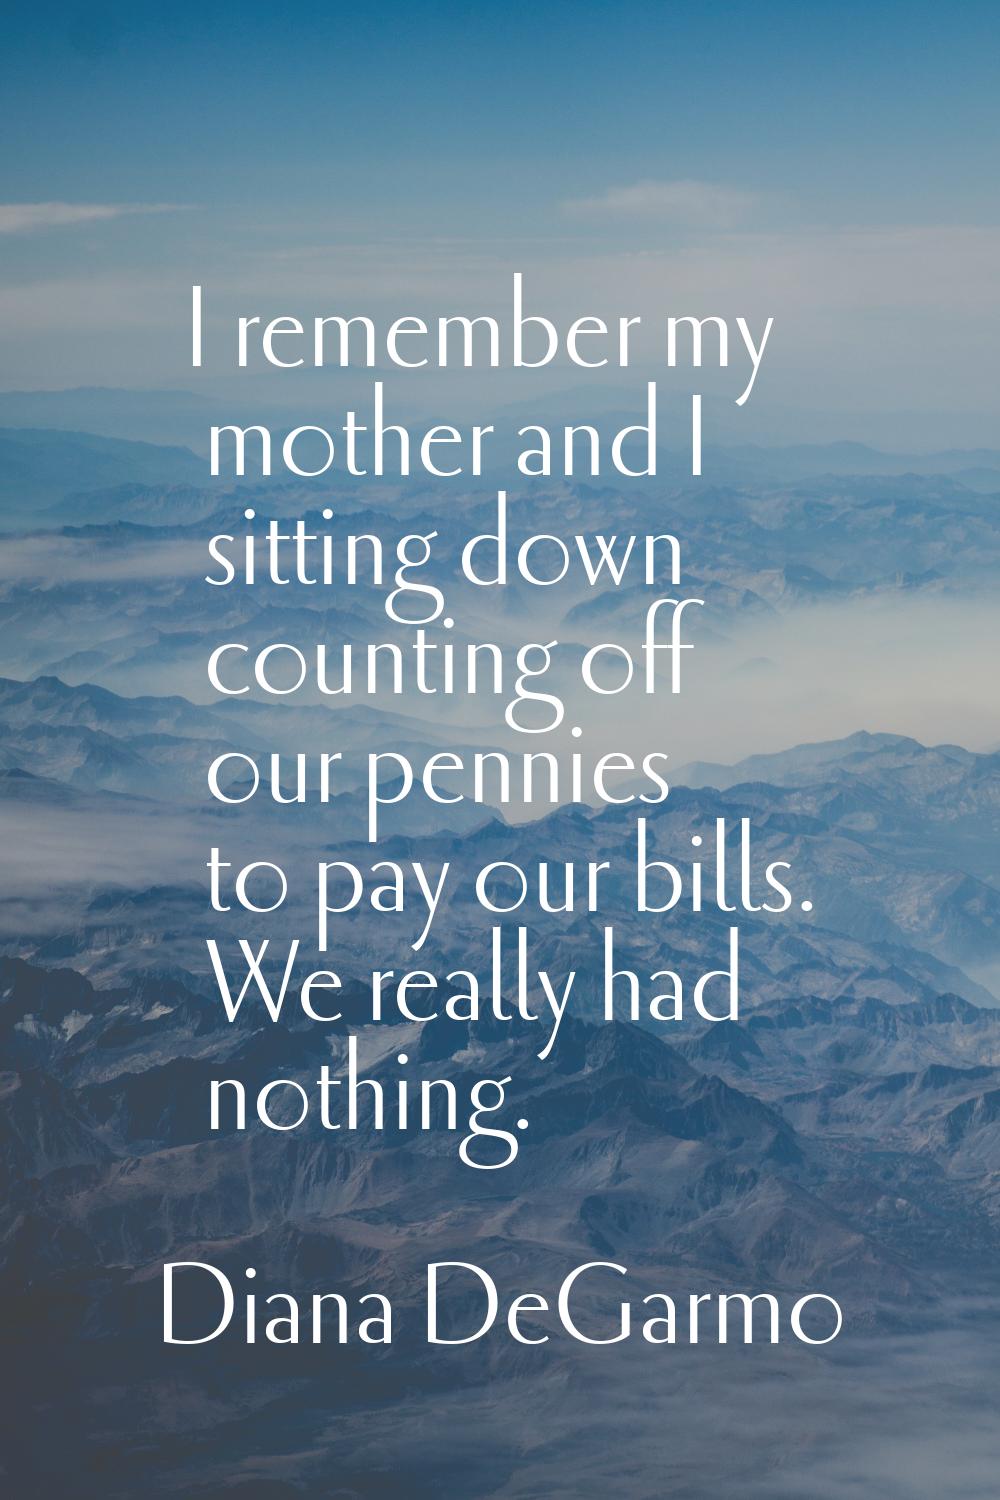 I remember my mother and I sitting down counting off our pennies to pay our bills. We really had no